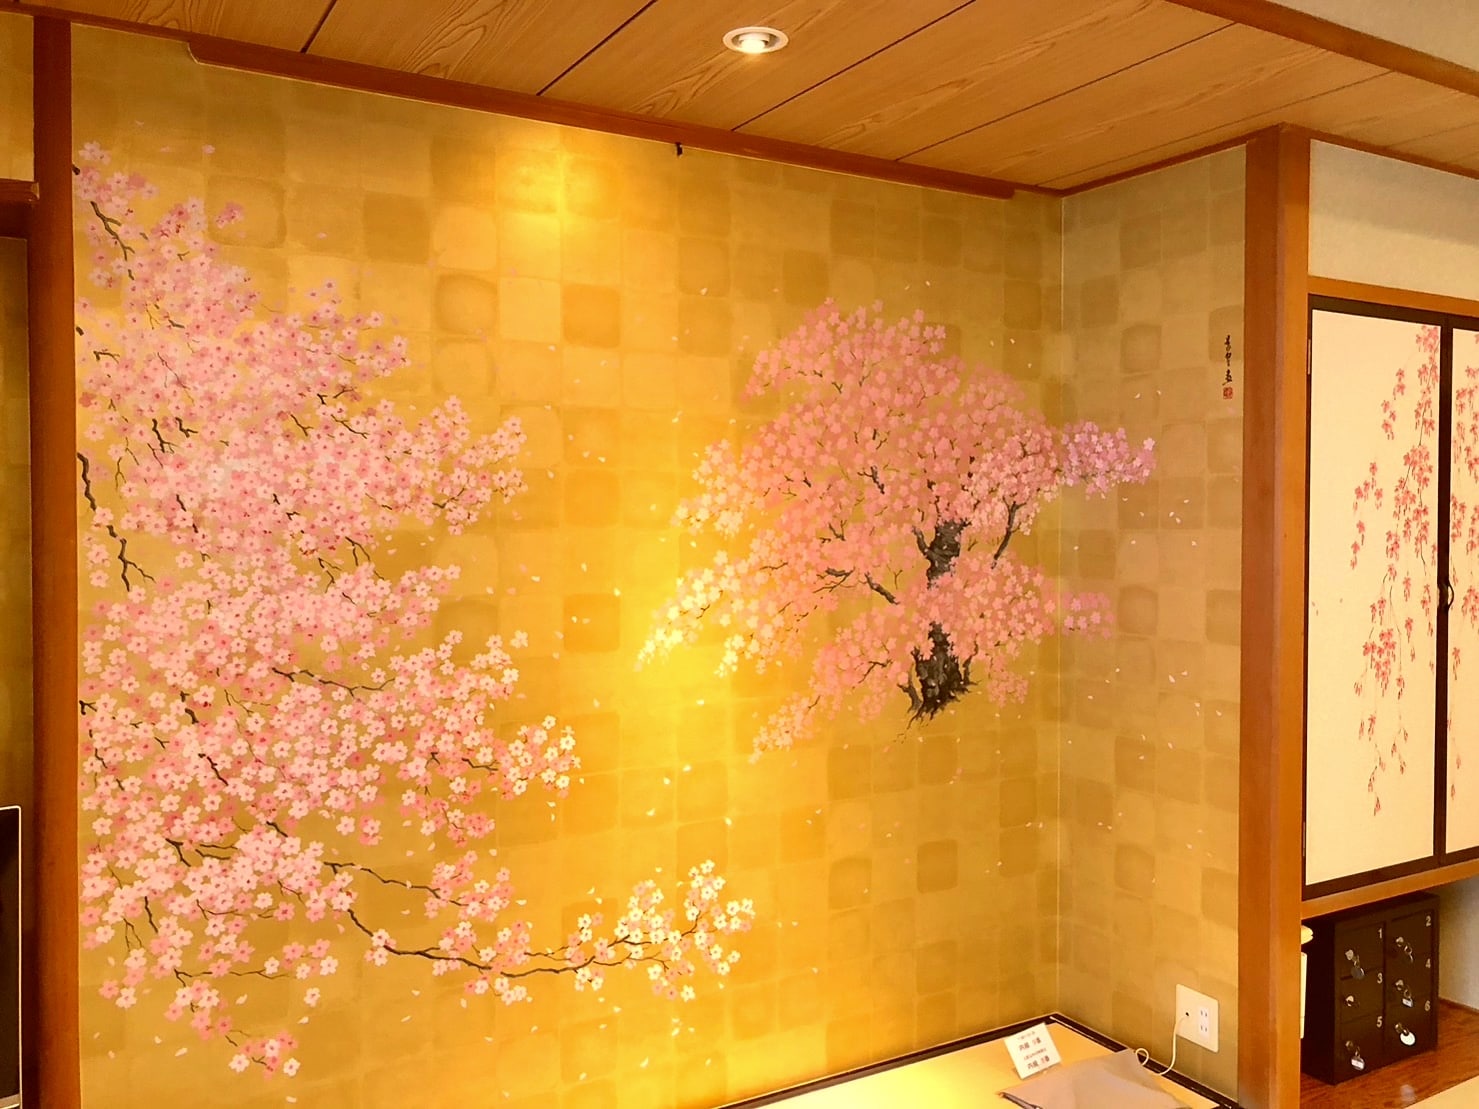 Special room for paintings (example) “Sakura Taihei” room (cherry blossoms in full bloom)